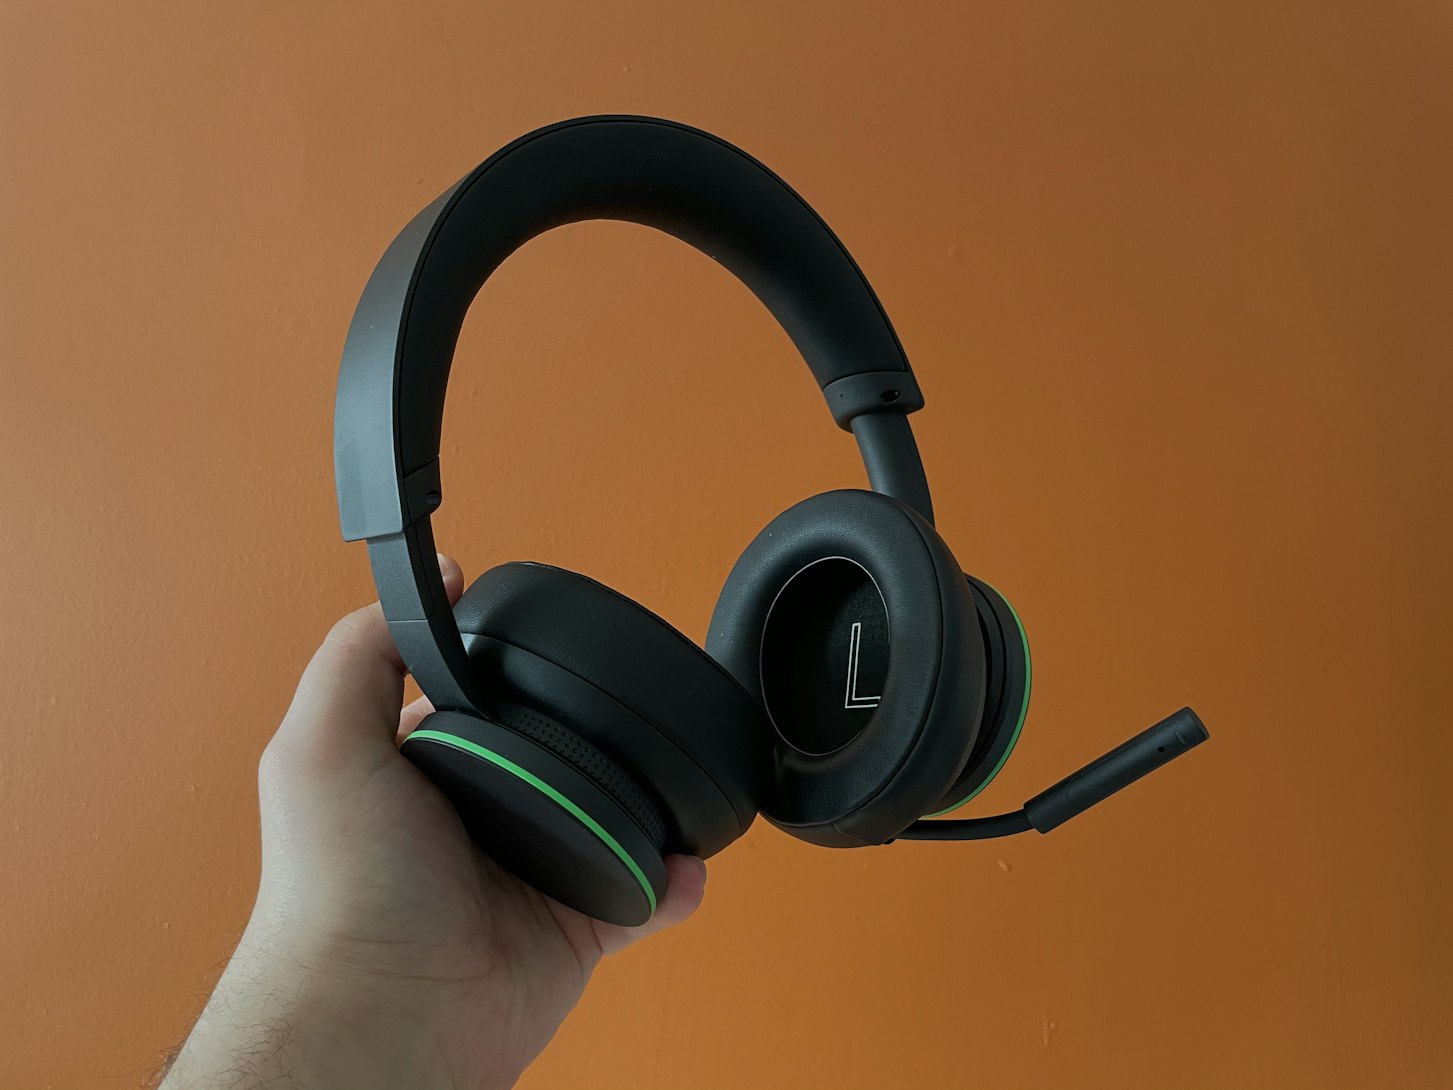 Experience the PULSE 3D Wireless Headset